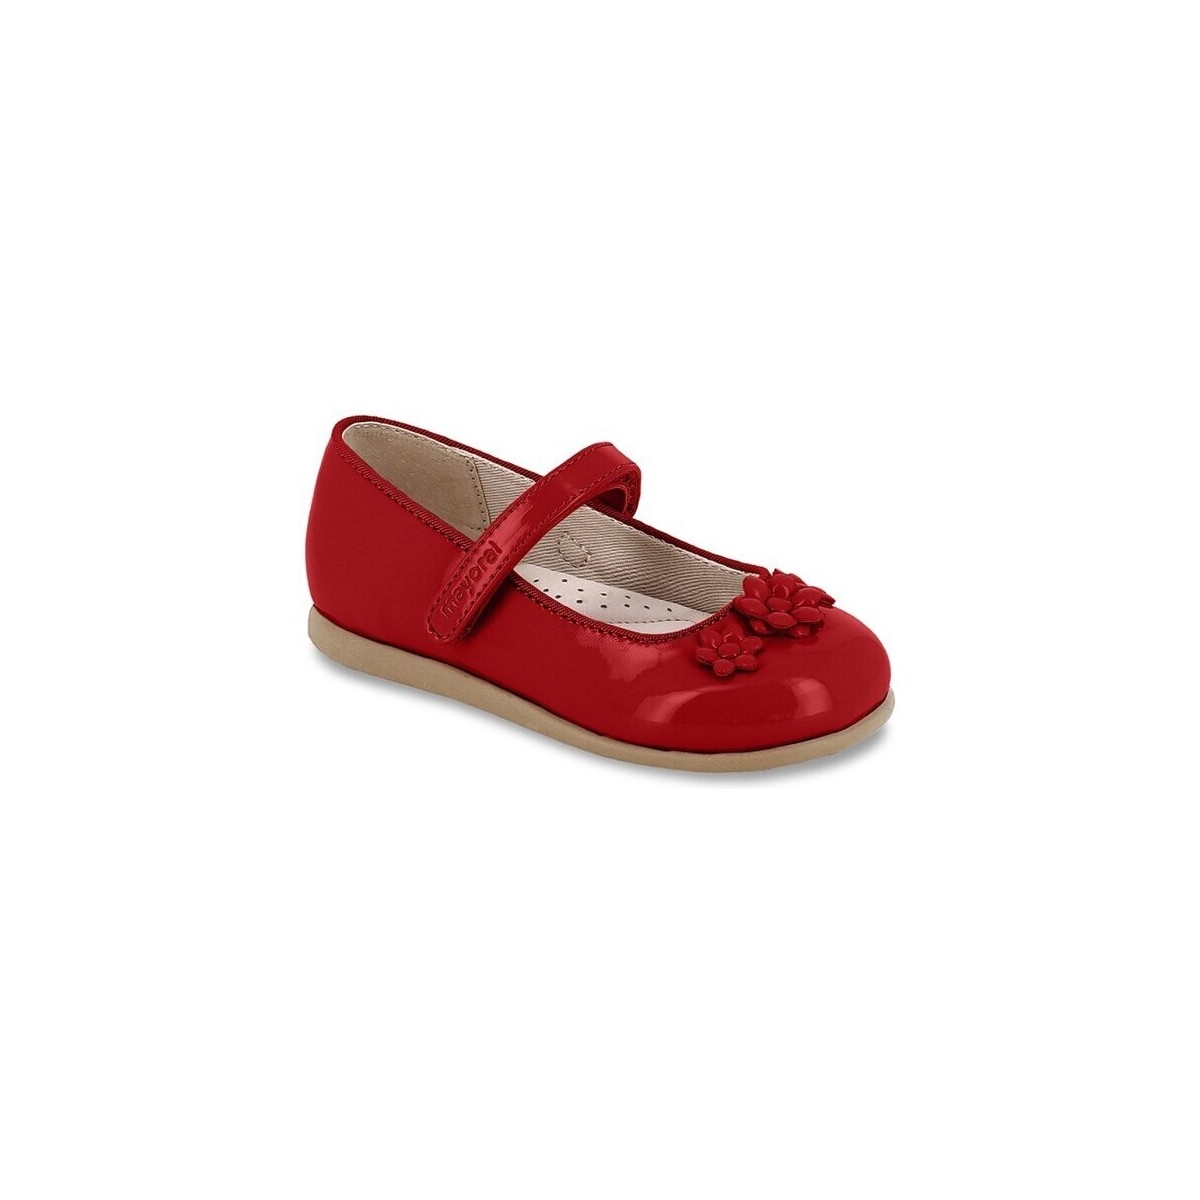 Chaussures Fille Ballerines / babies Mayoral 27083-18 Rouge